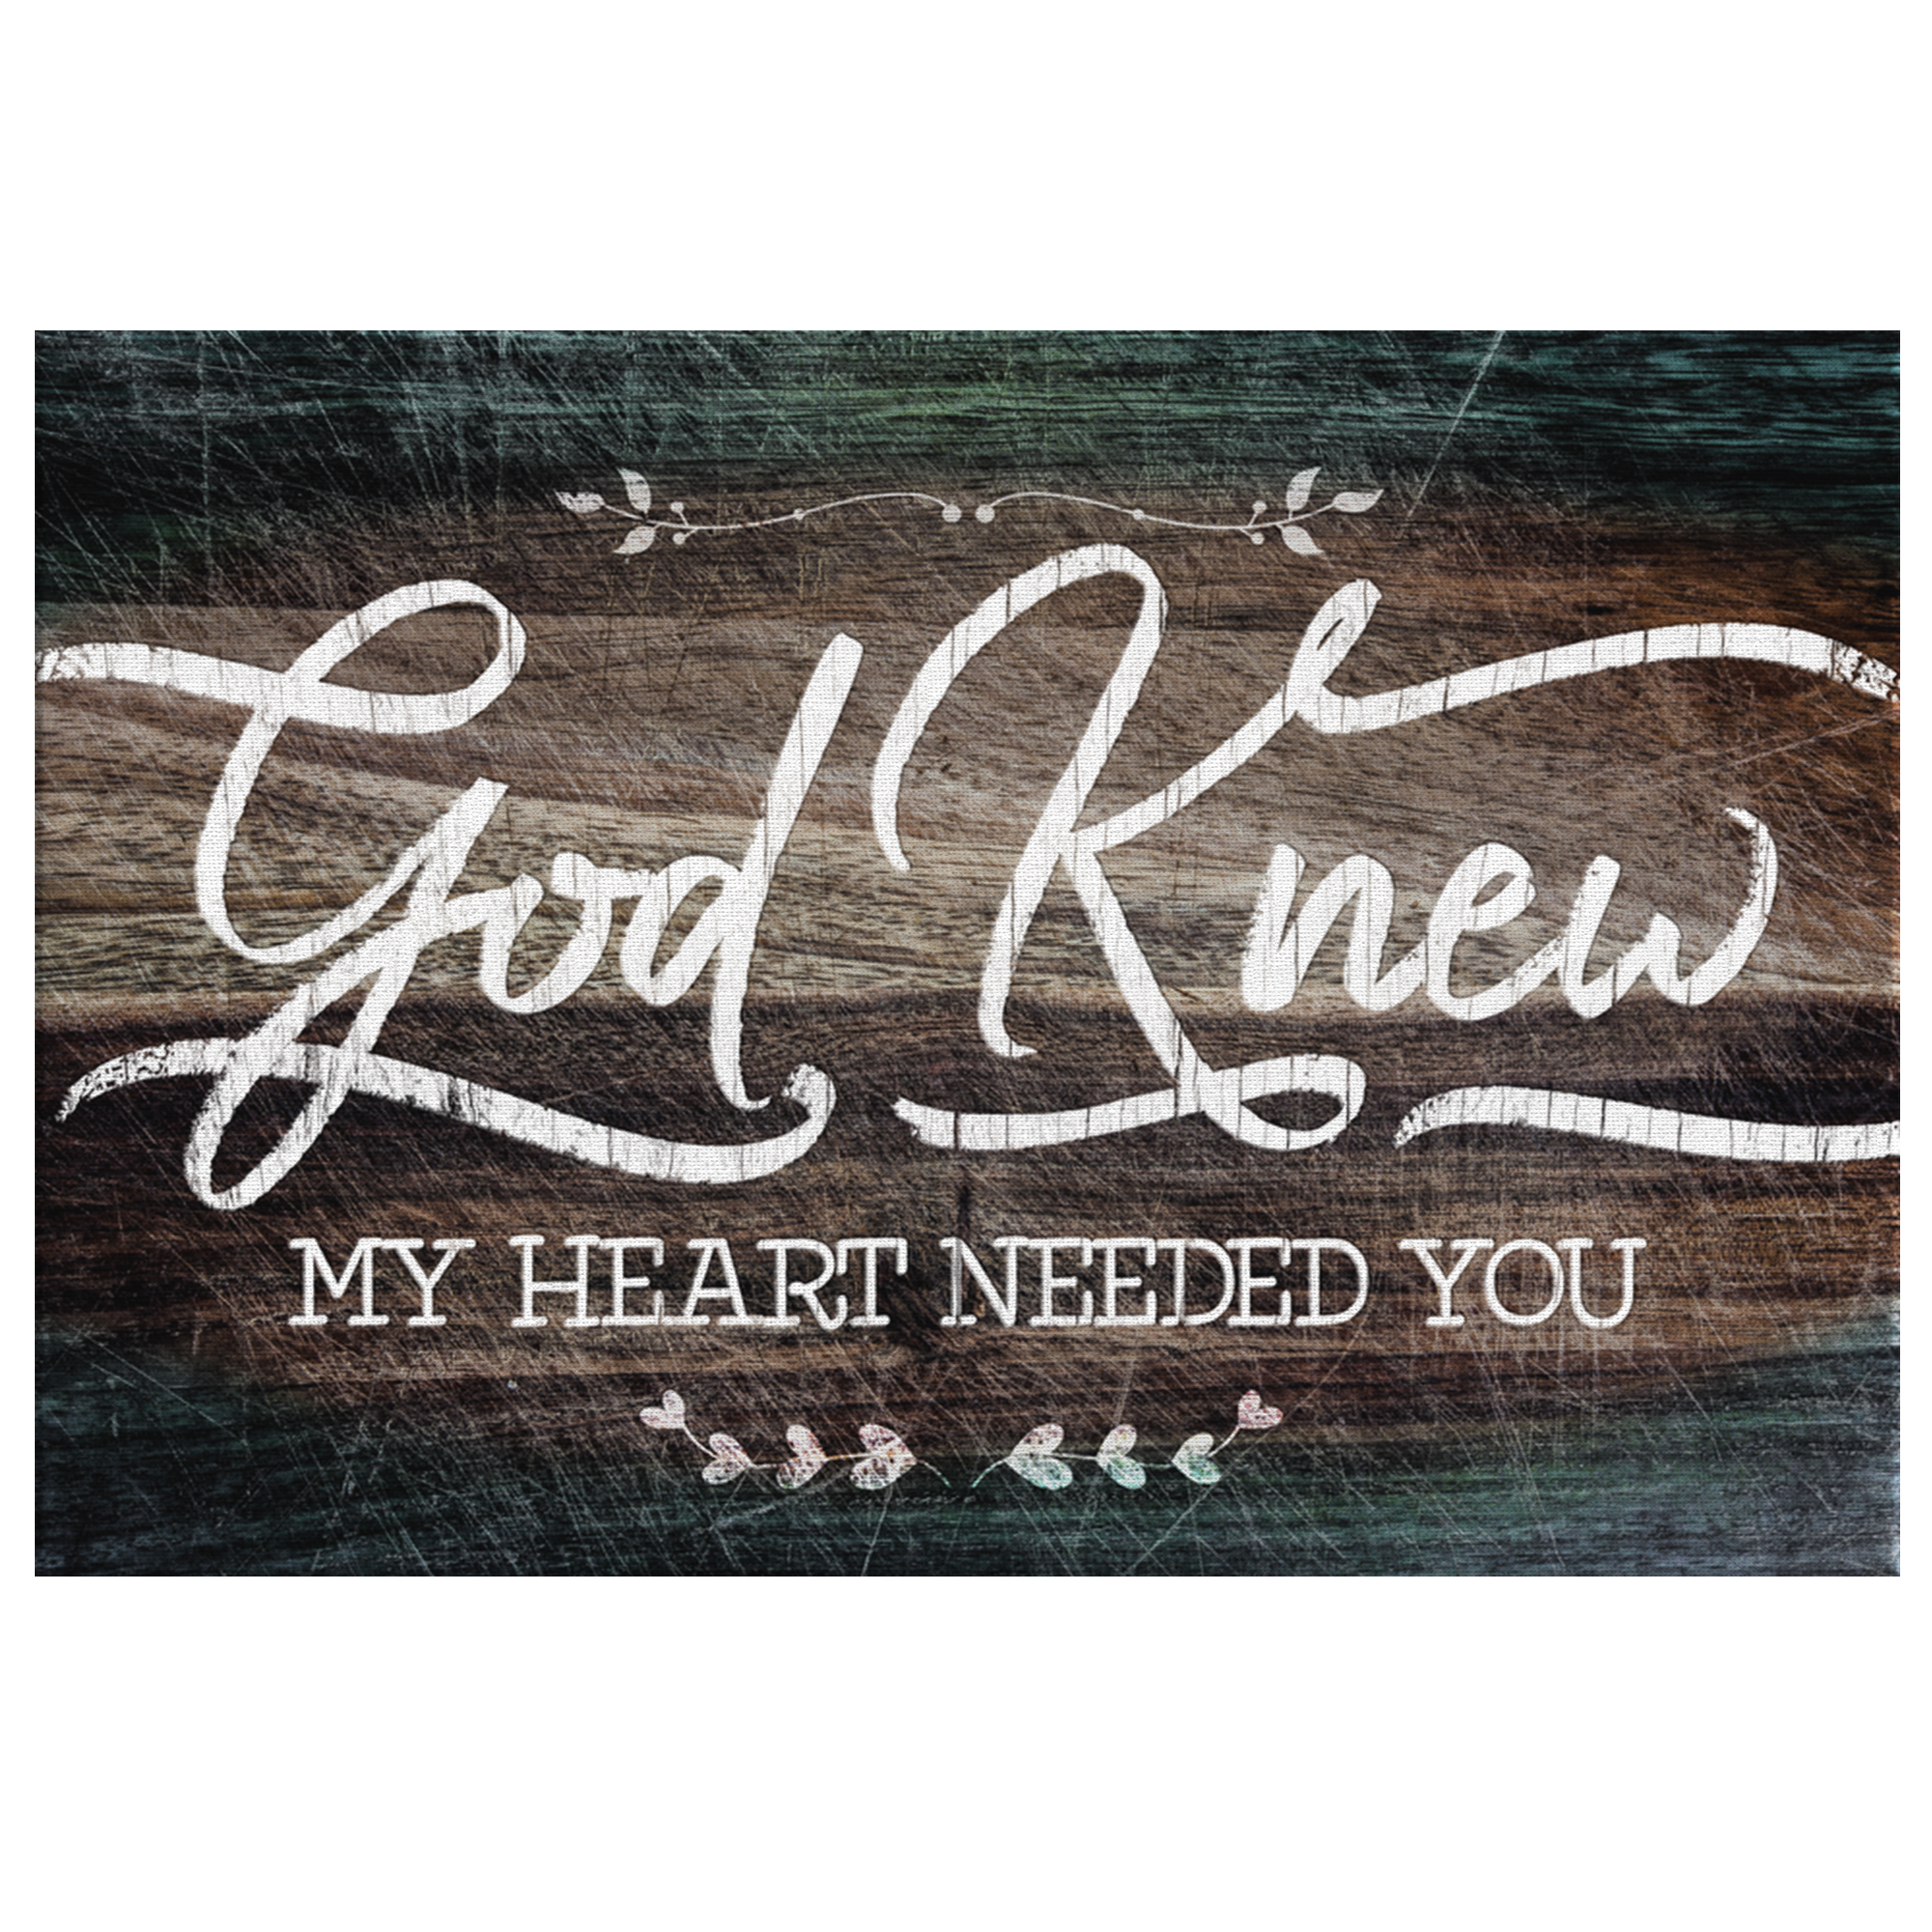 "God Knew My Heart Needed You" Premium Rustic Canvas Wall Art